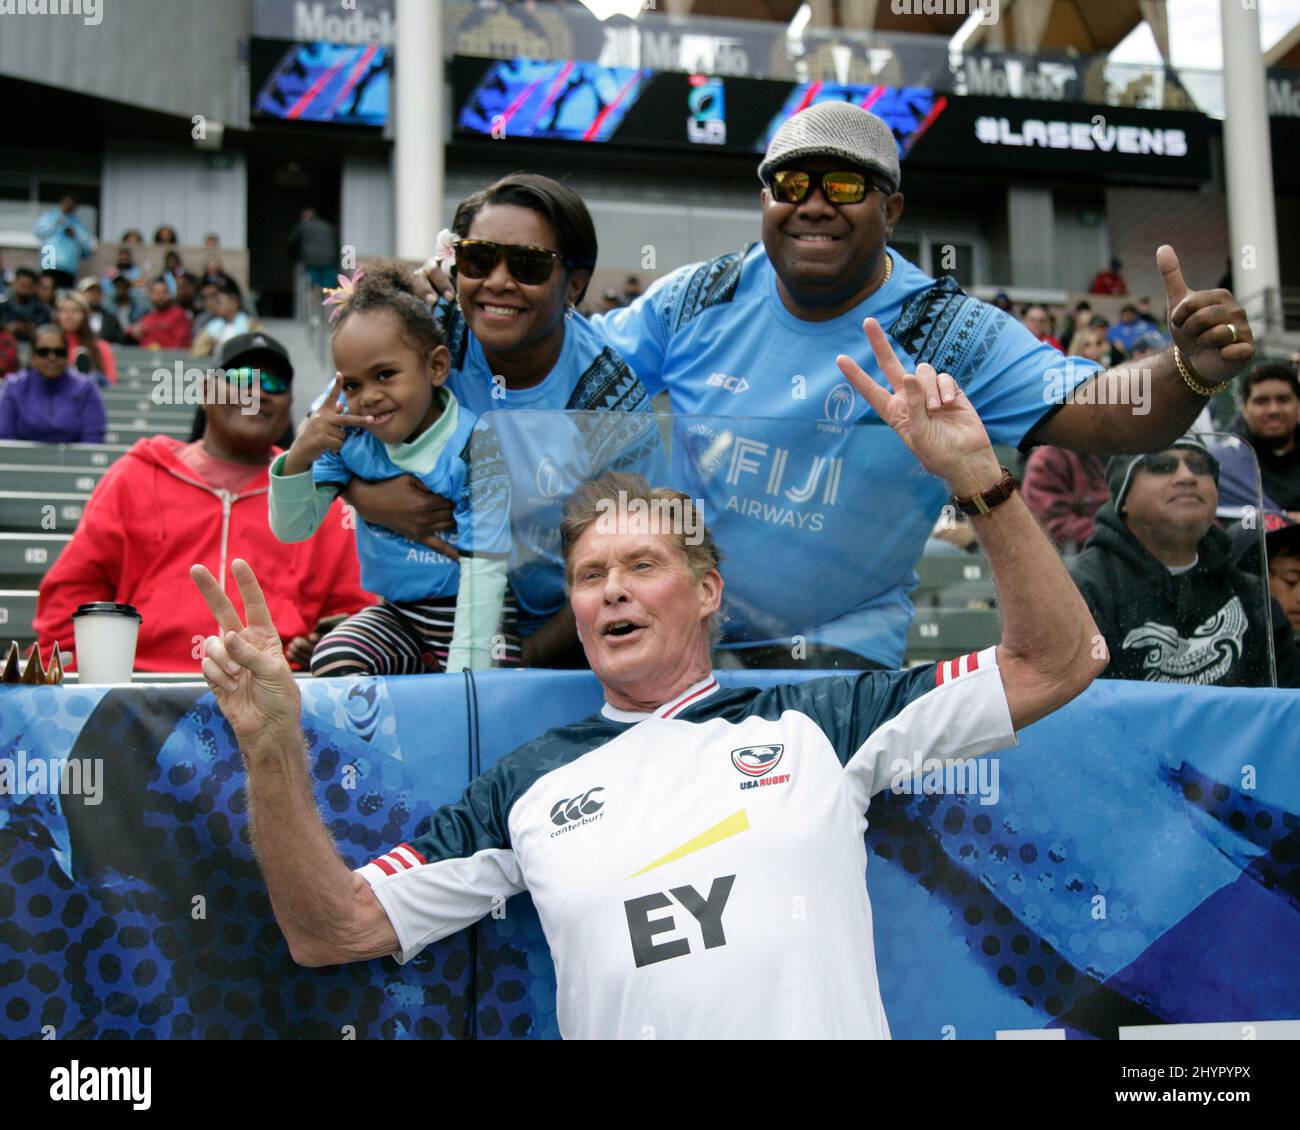 David Hasselhoff attends the 2020 HSBC World Rugby Sevens Series at Dignity Health Sports Park in Carson, CA. on March 1, 2020 Stock Photo